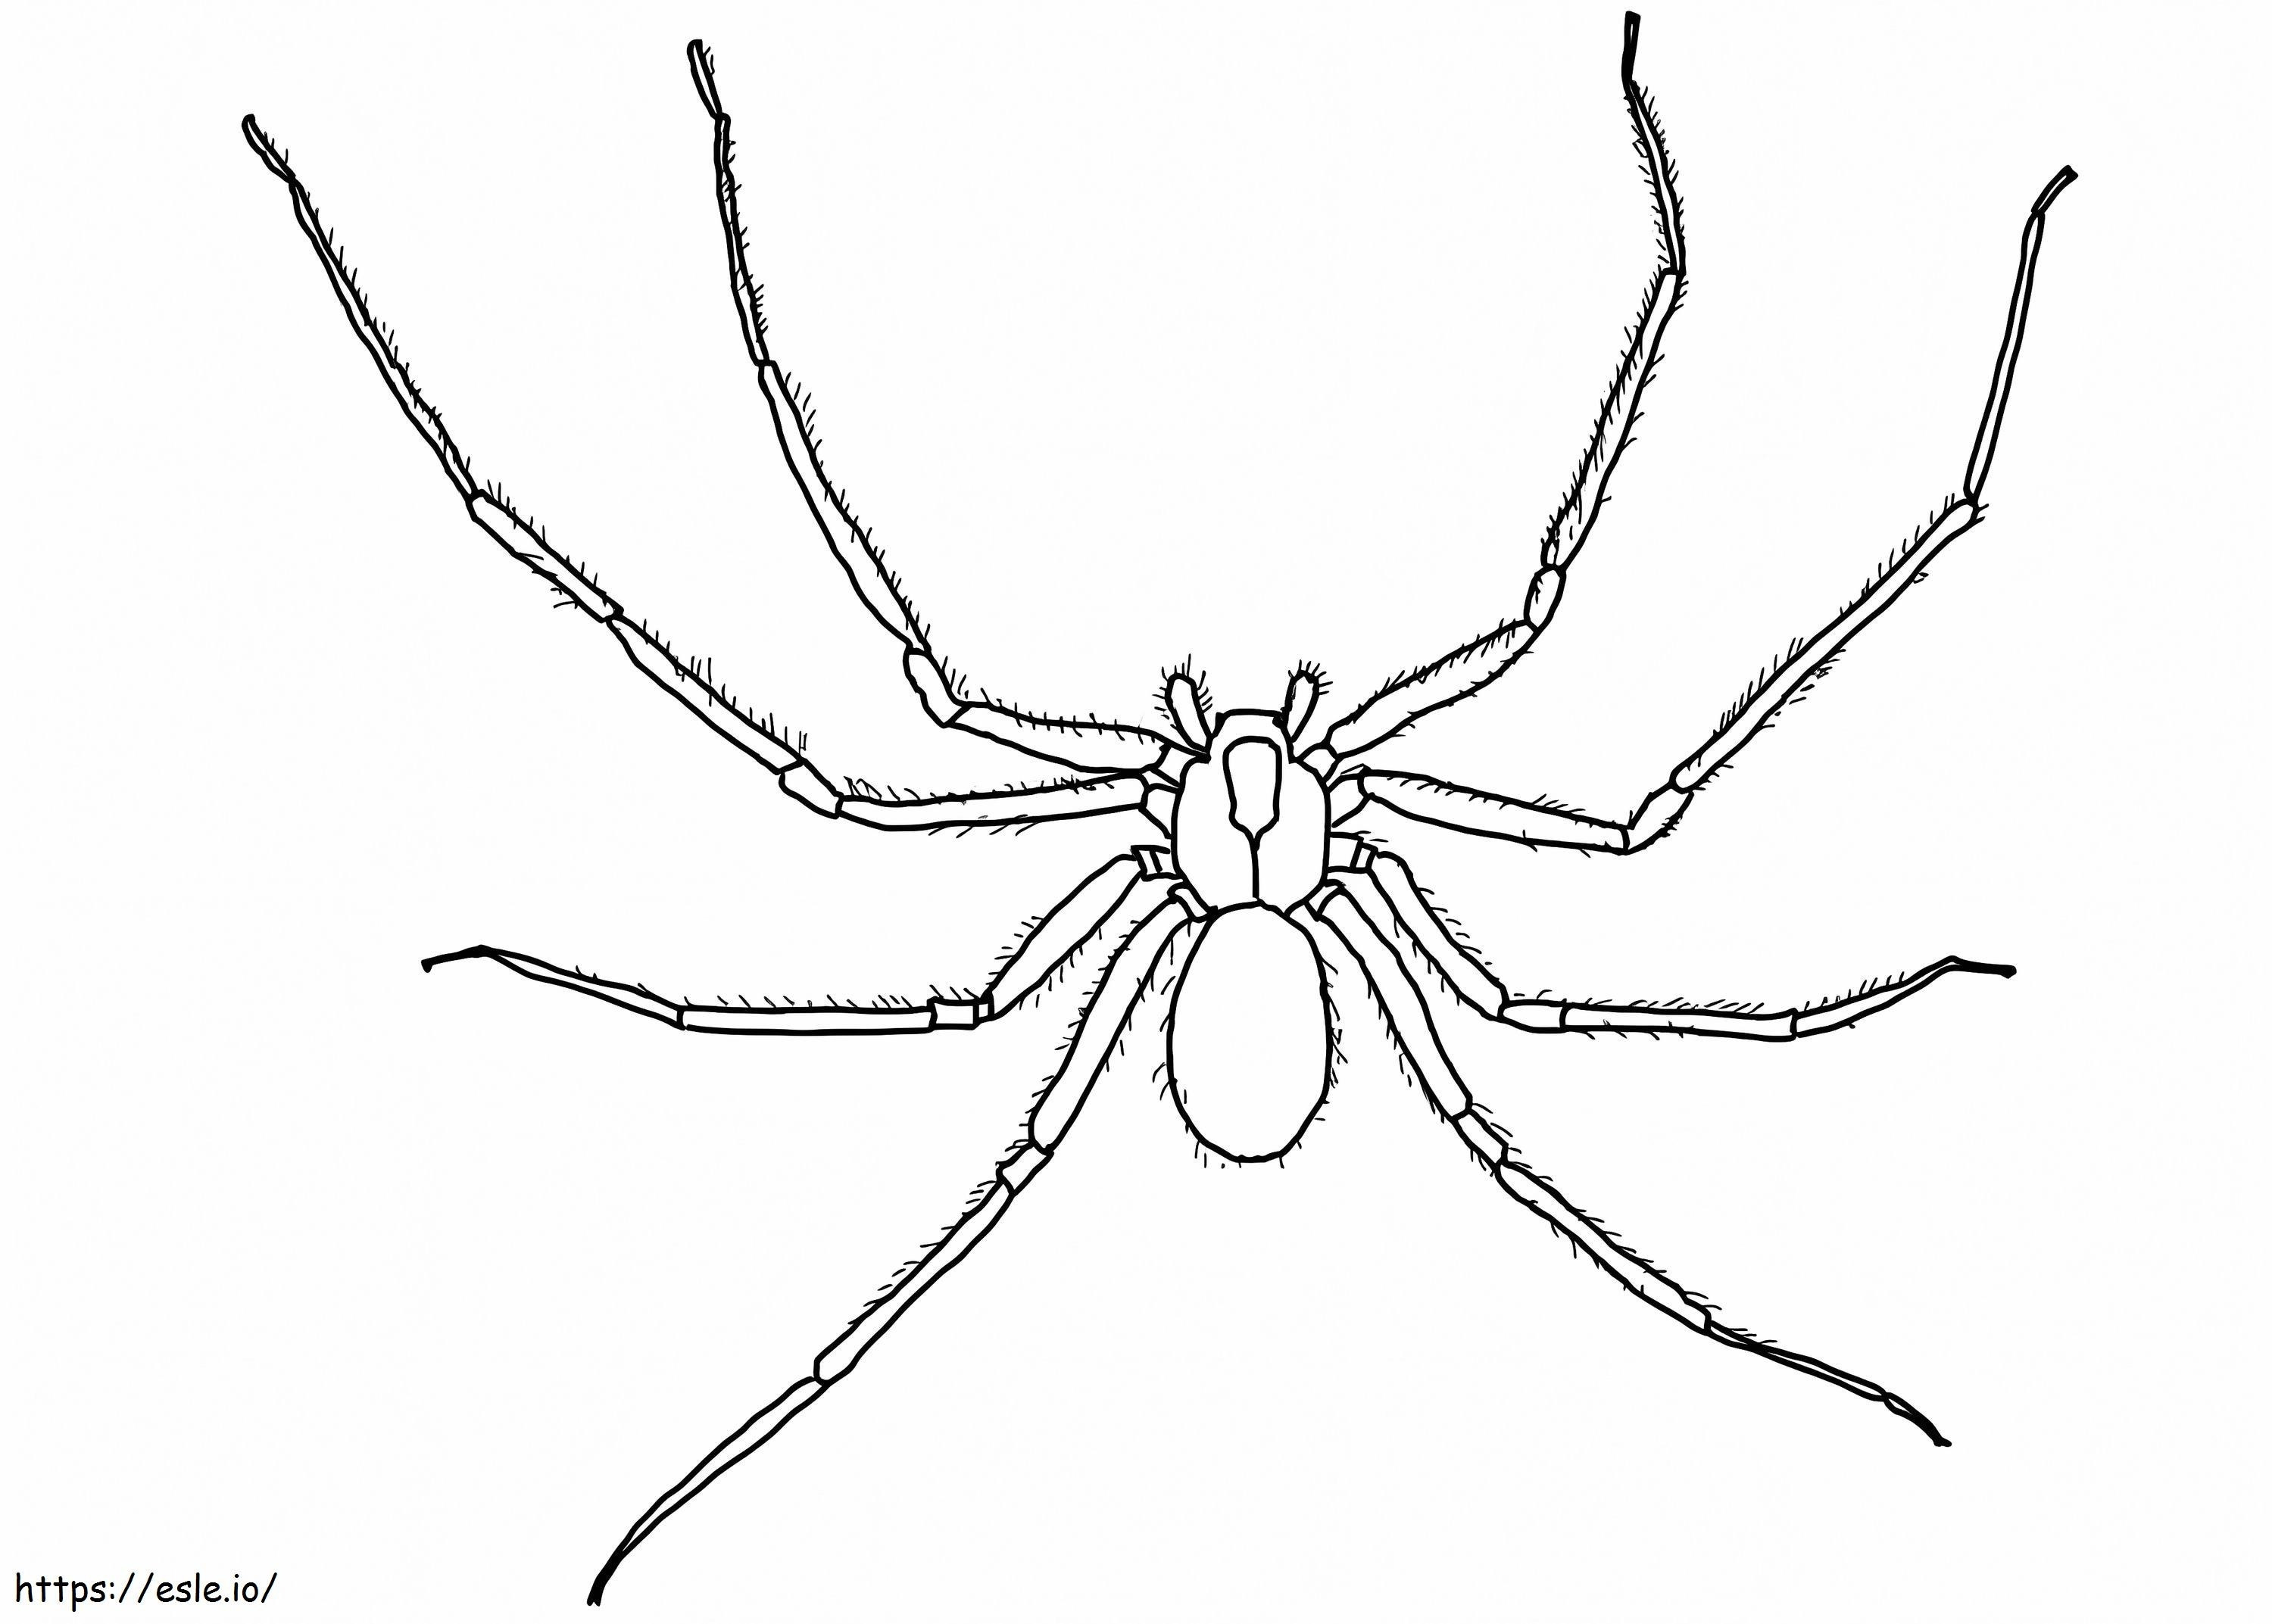 Brown Recluse Spider coloring page